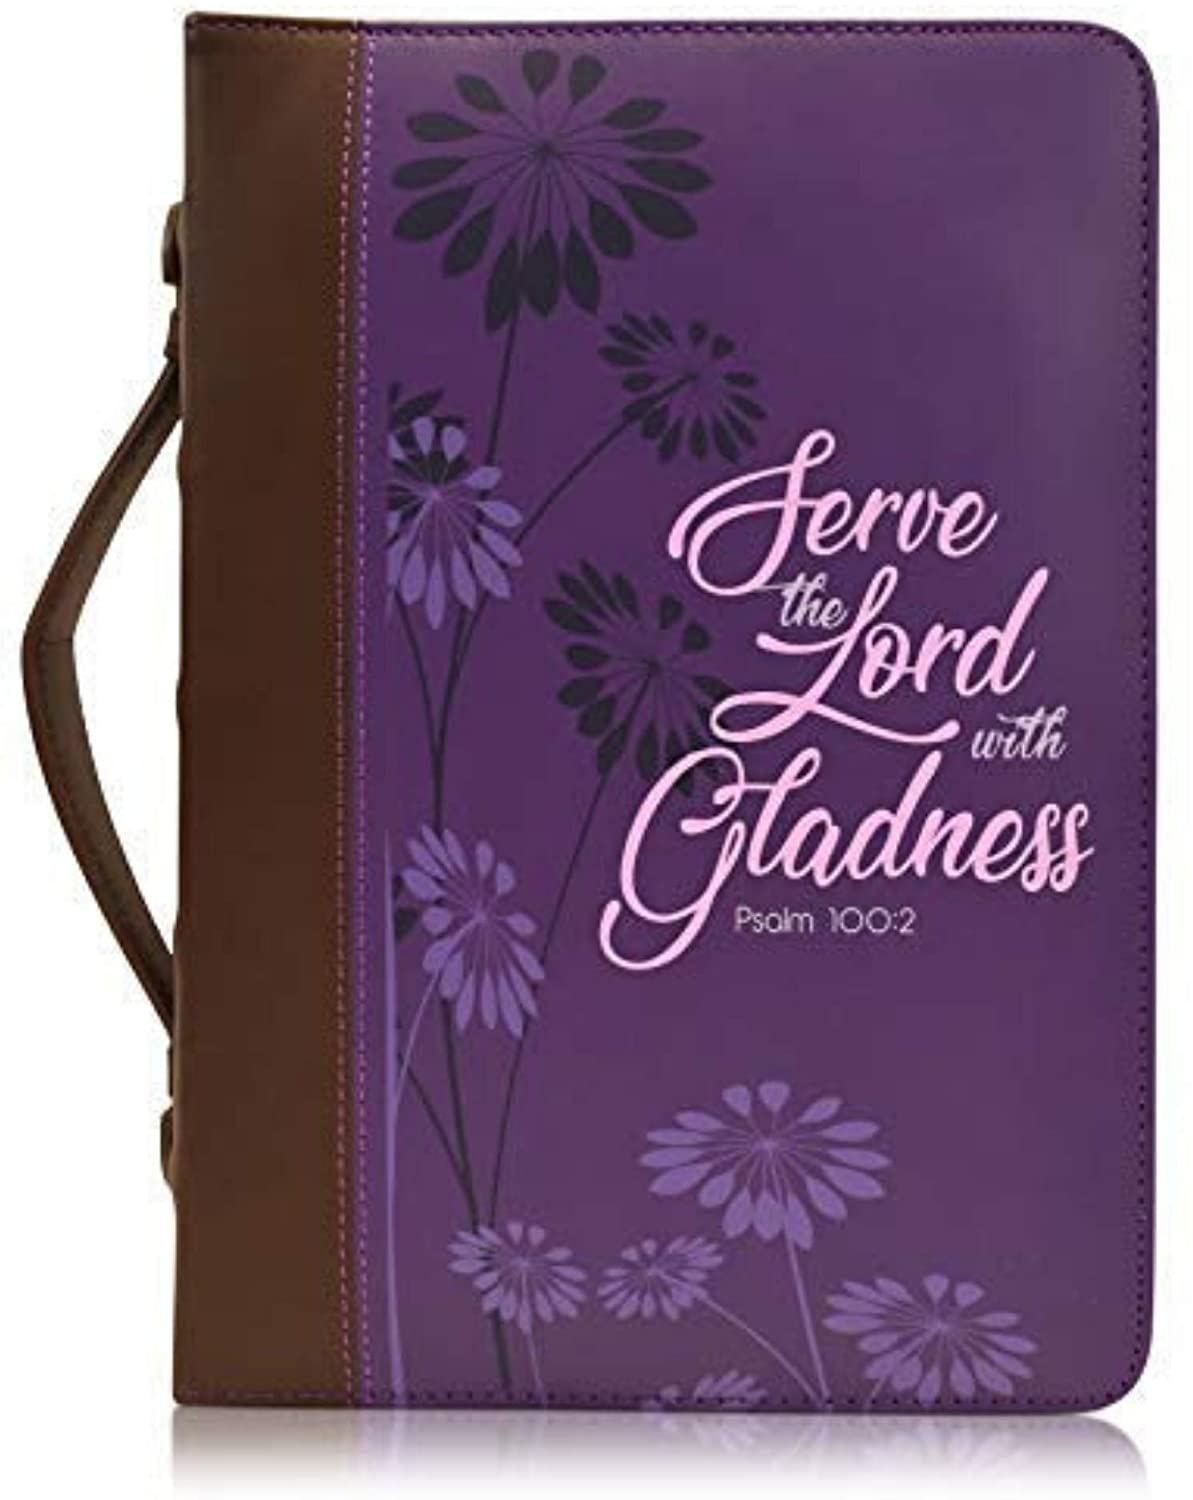 Women's Bible Cover , “Serve The Lord with Gladness- Psalm 100:2"